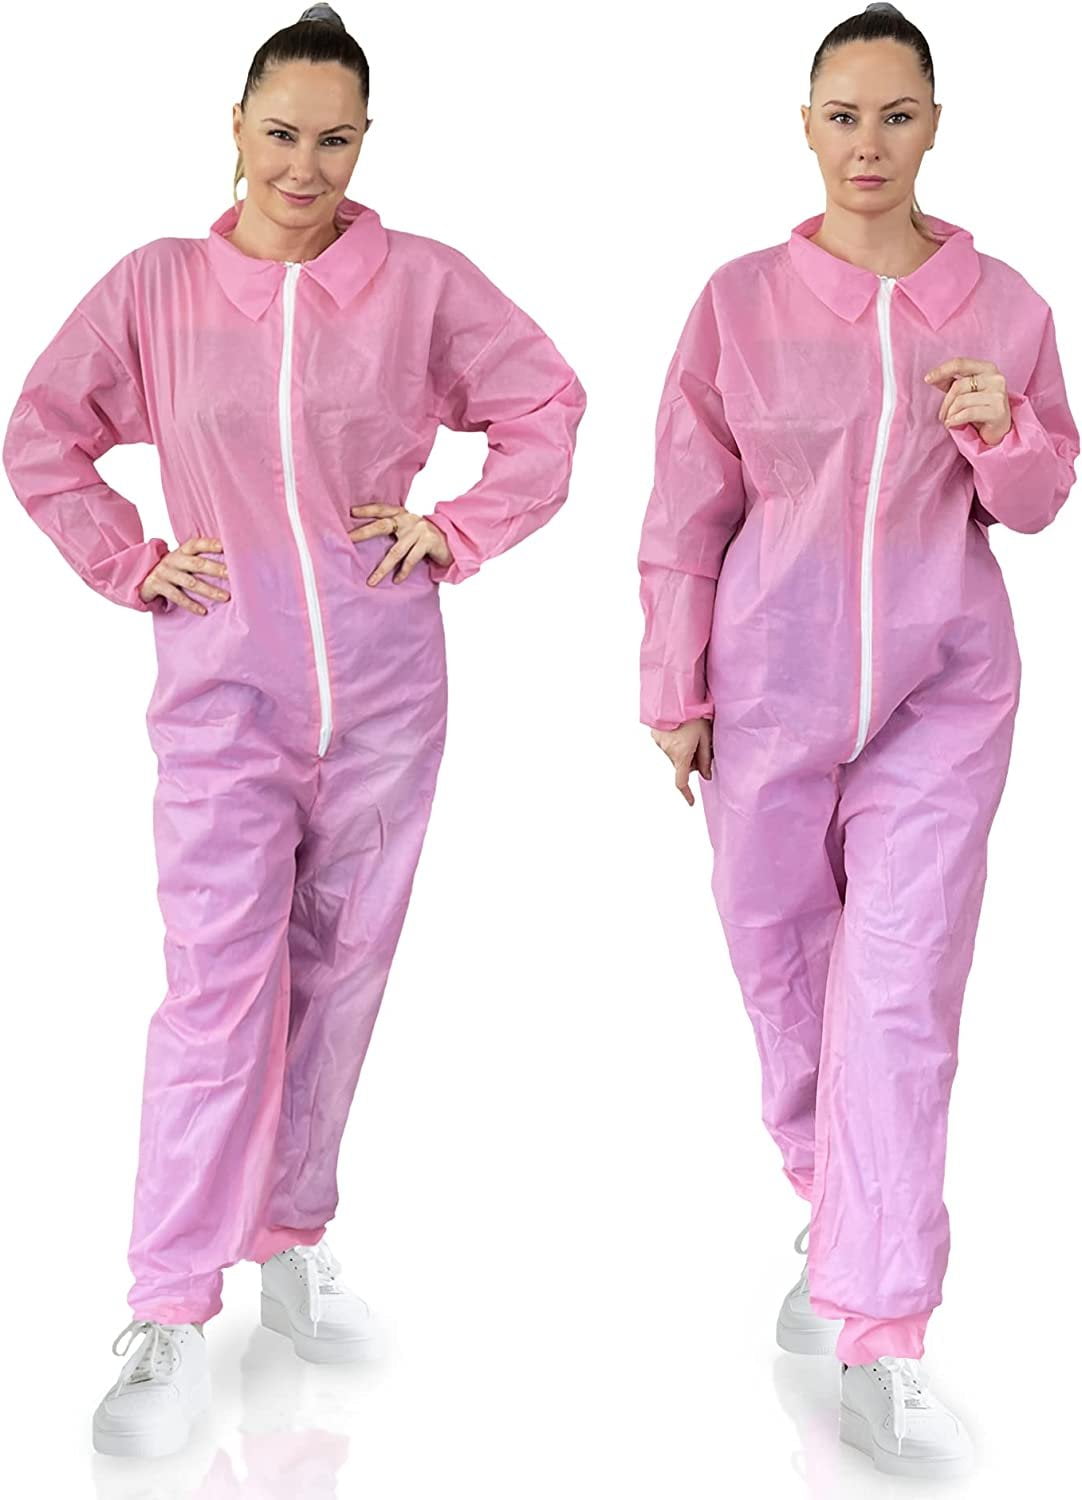 EZGOODZ Disposable Coveralls for Men, Women, Pack of 25 Medium Pink ...